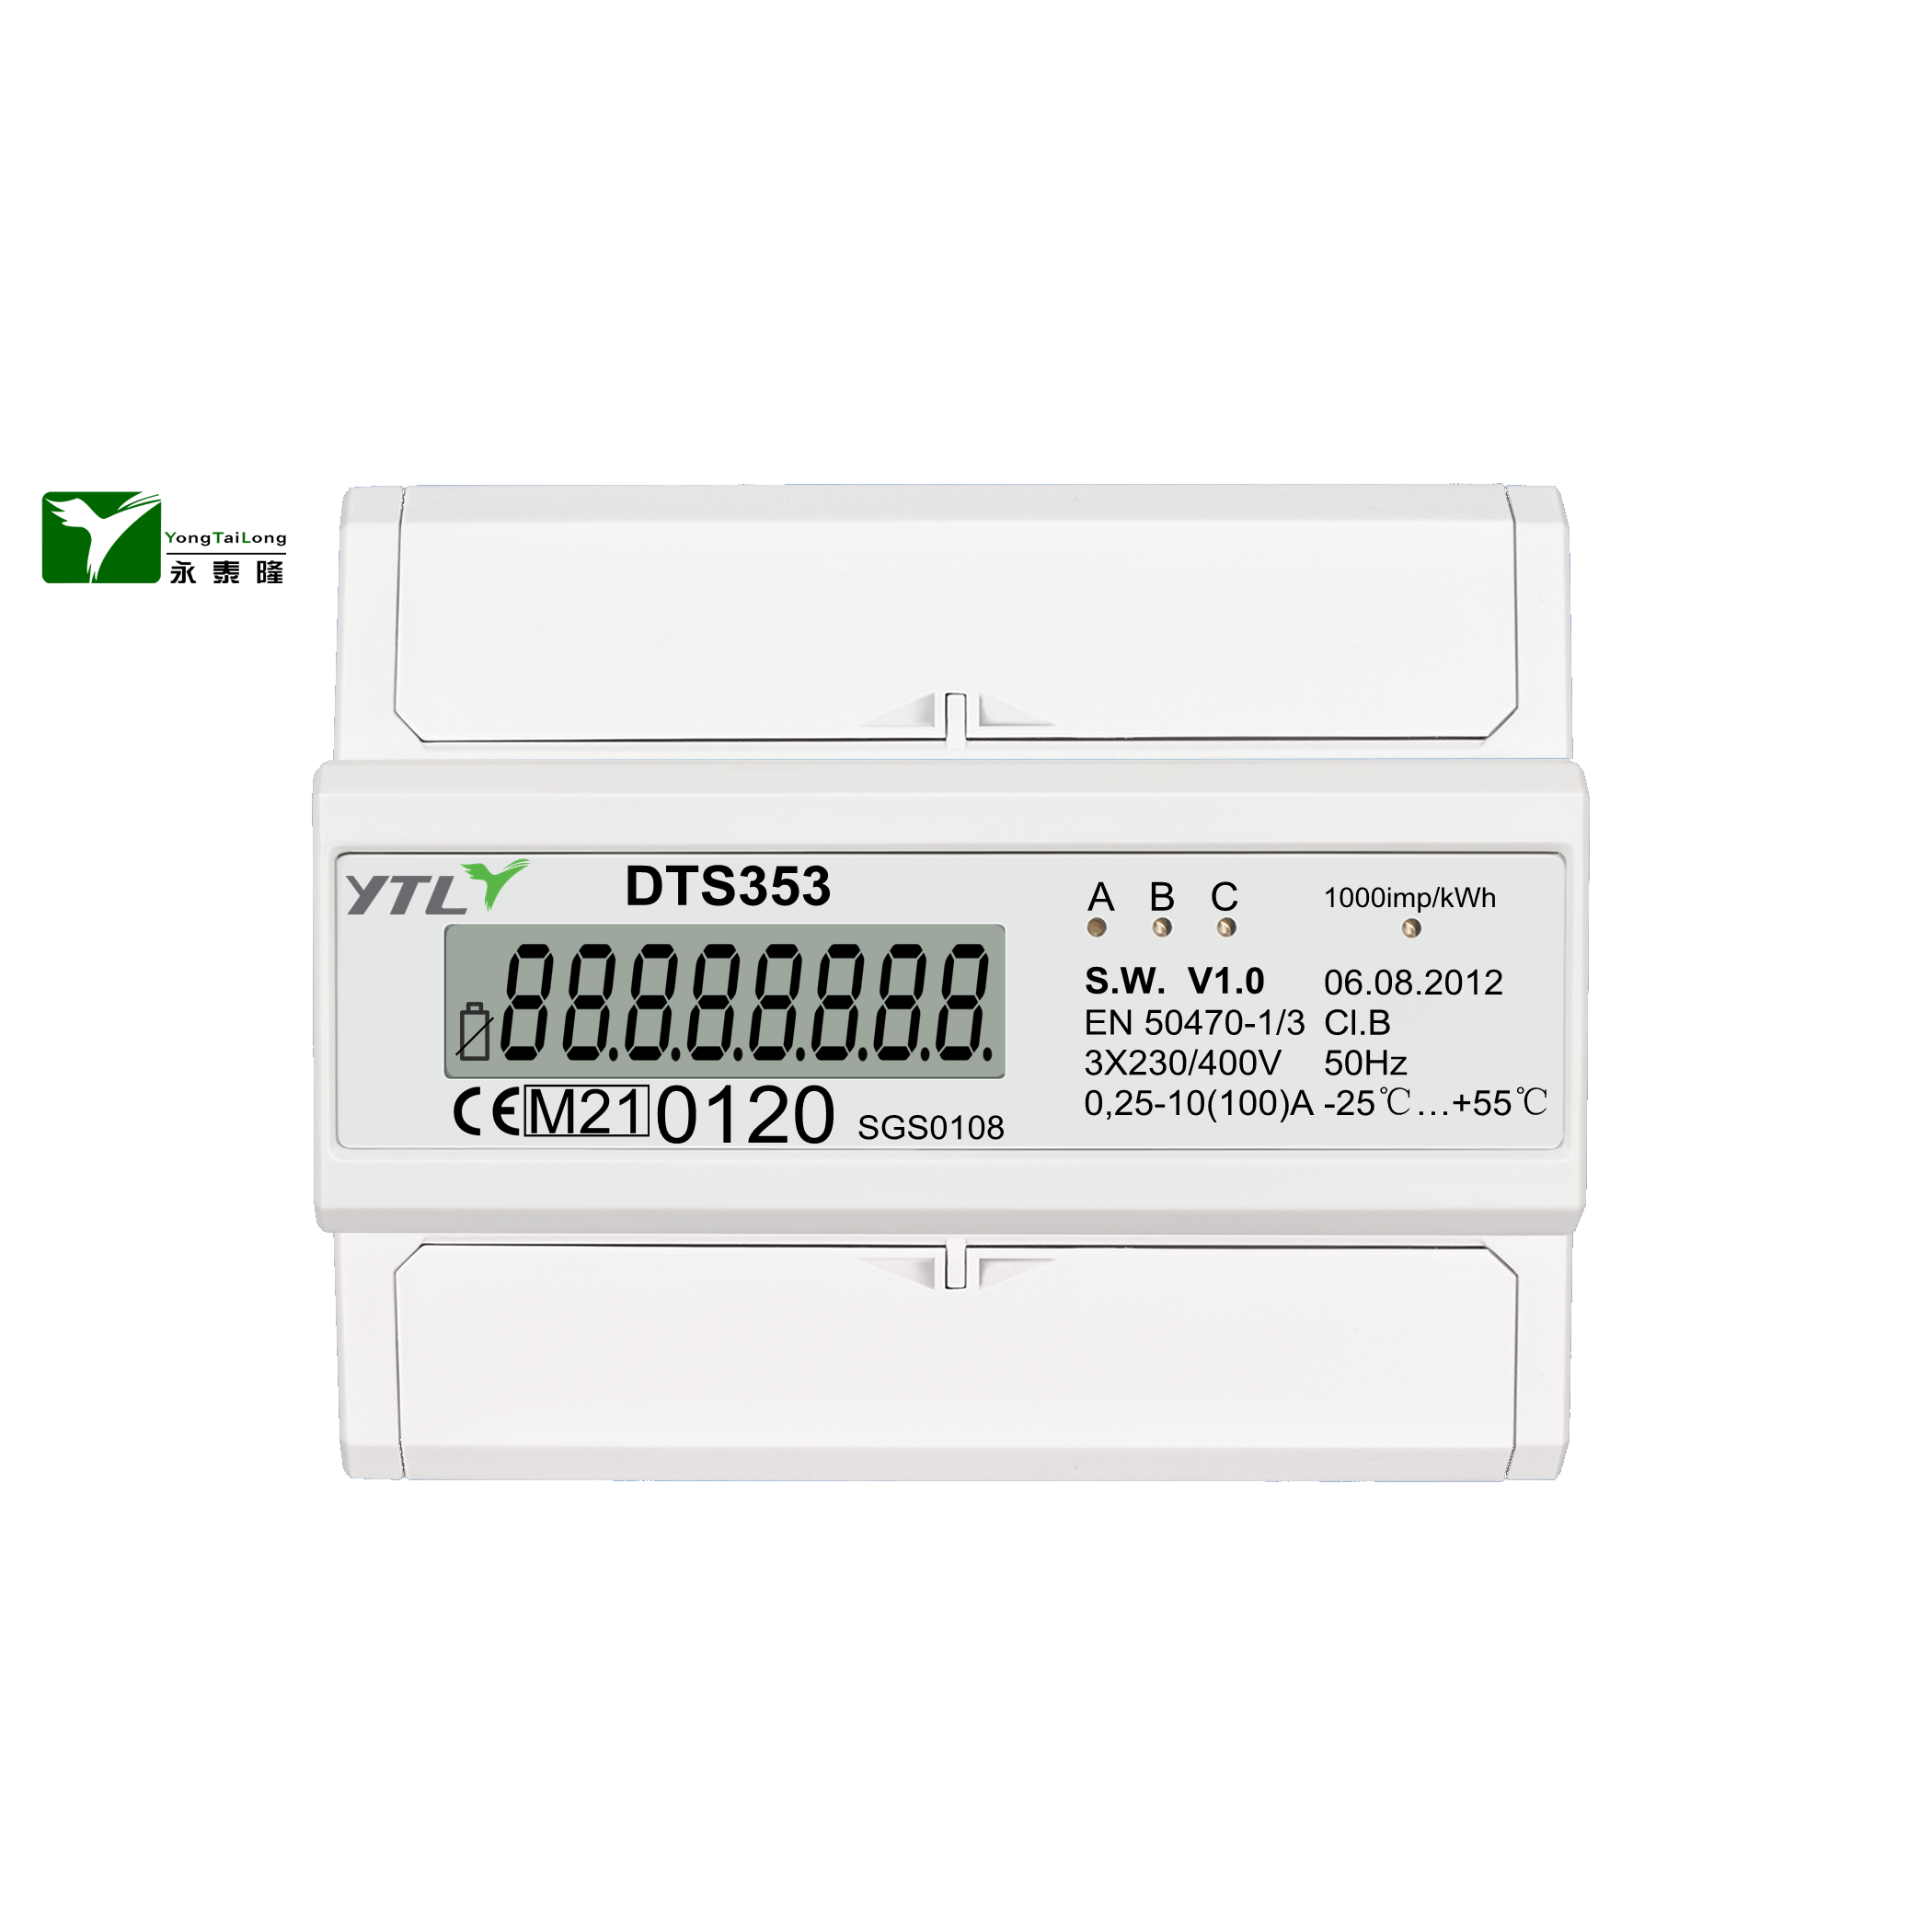 Modbus Protocol And 645 Protocol Built-In 90A Relay smart three phase Power meter